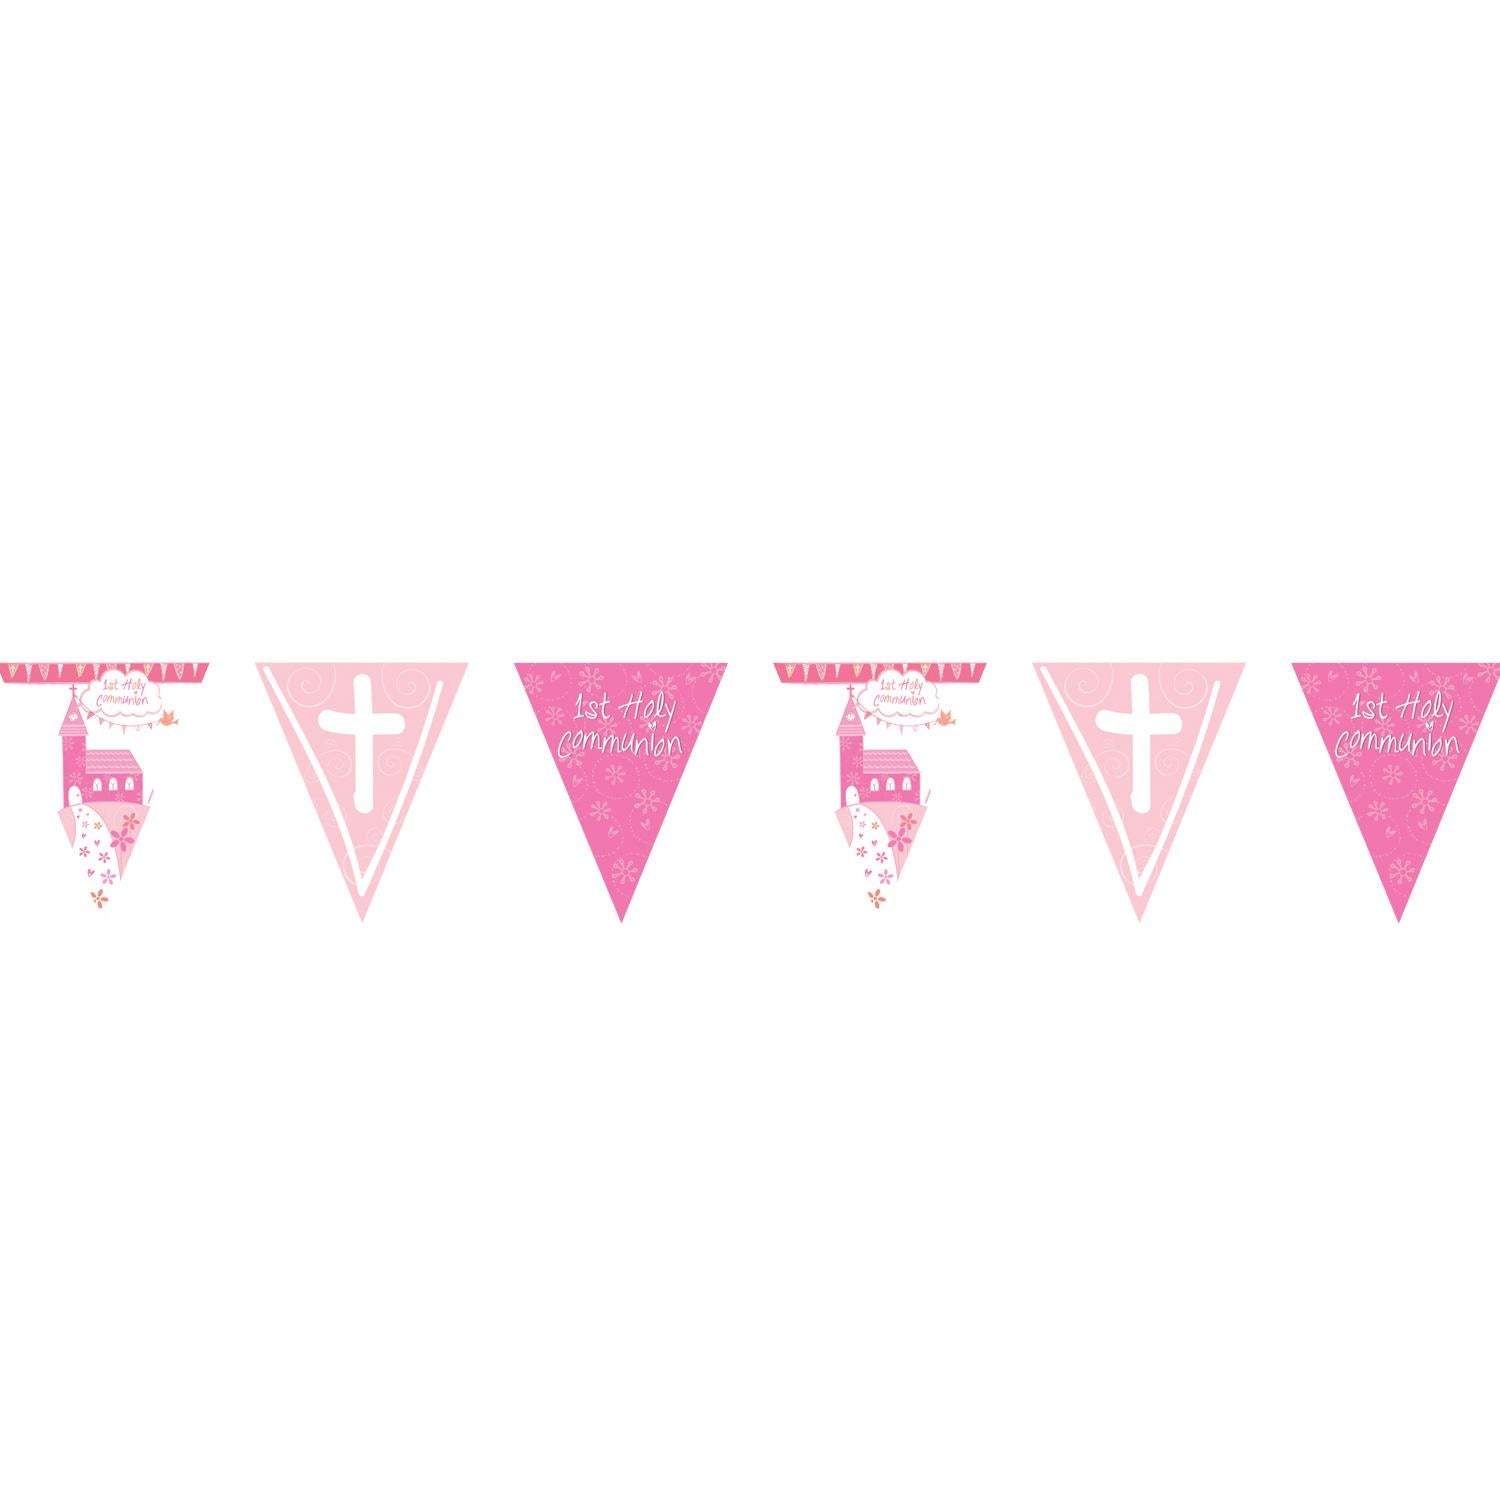 Communion Church Pink Pennant Banner Decorations - Party Centre